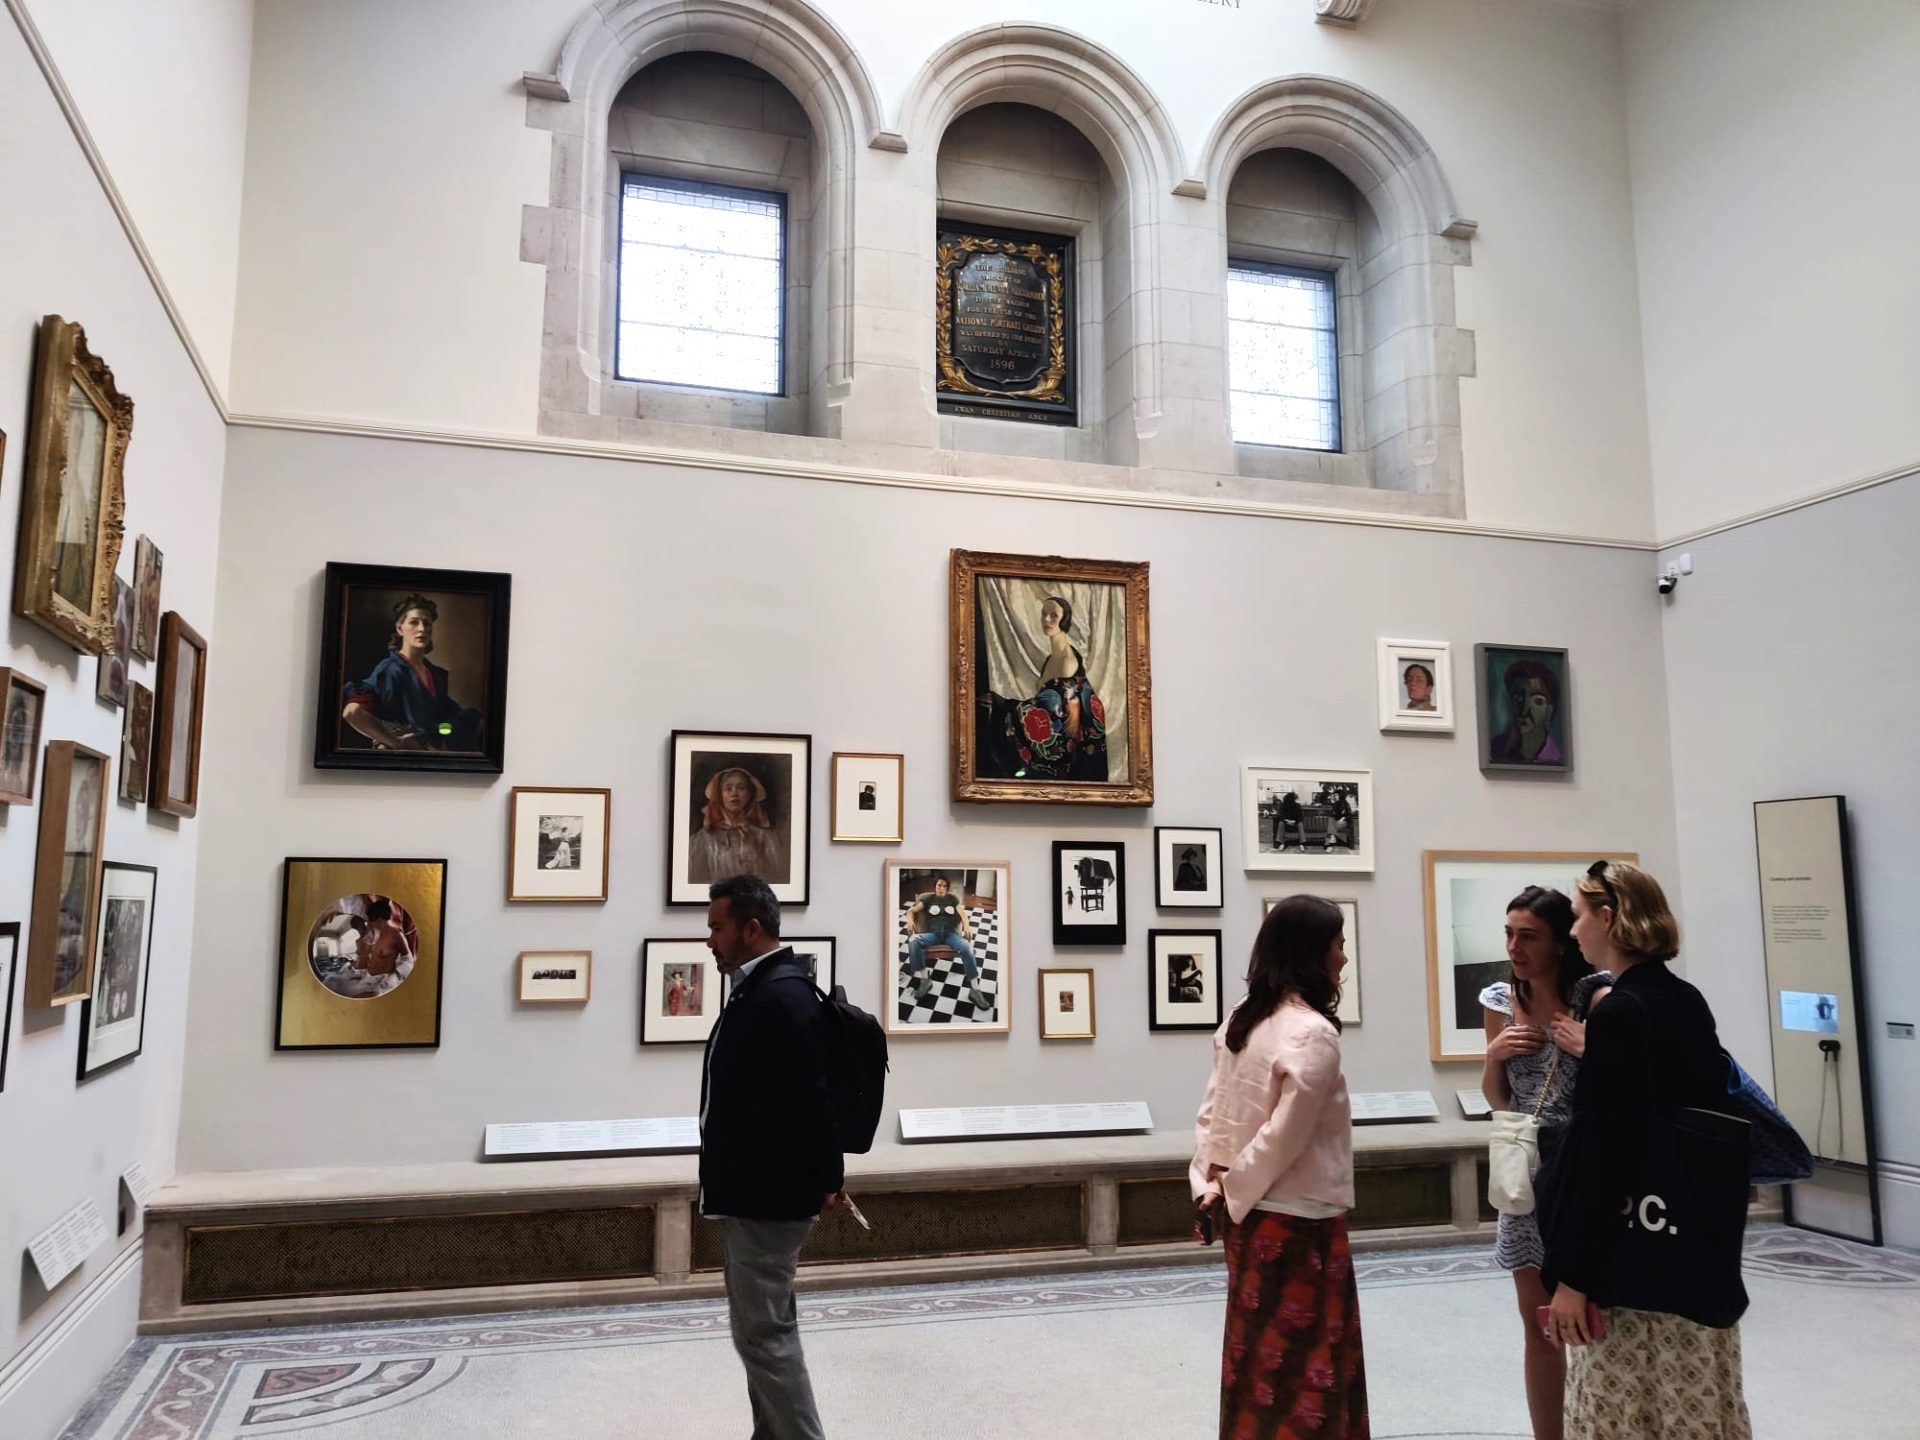 View of the inside of an art gallery with paintings on the walls and people walking around them.